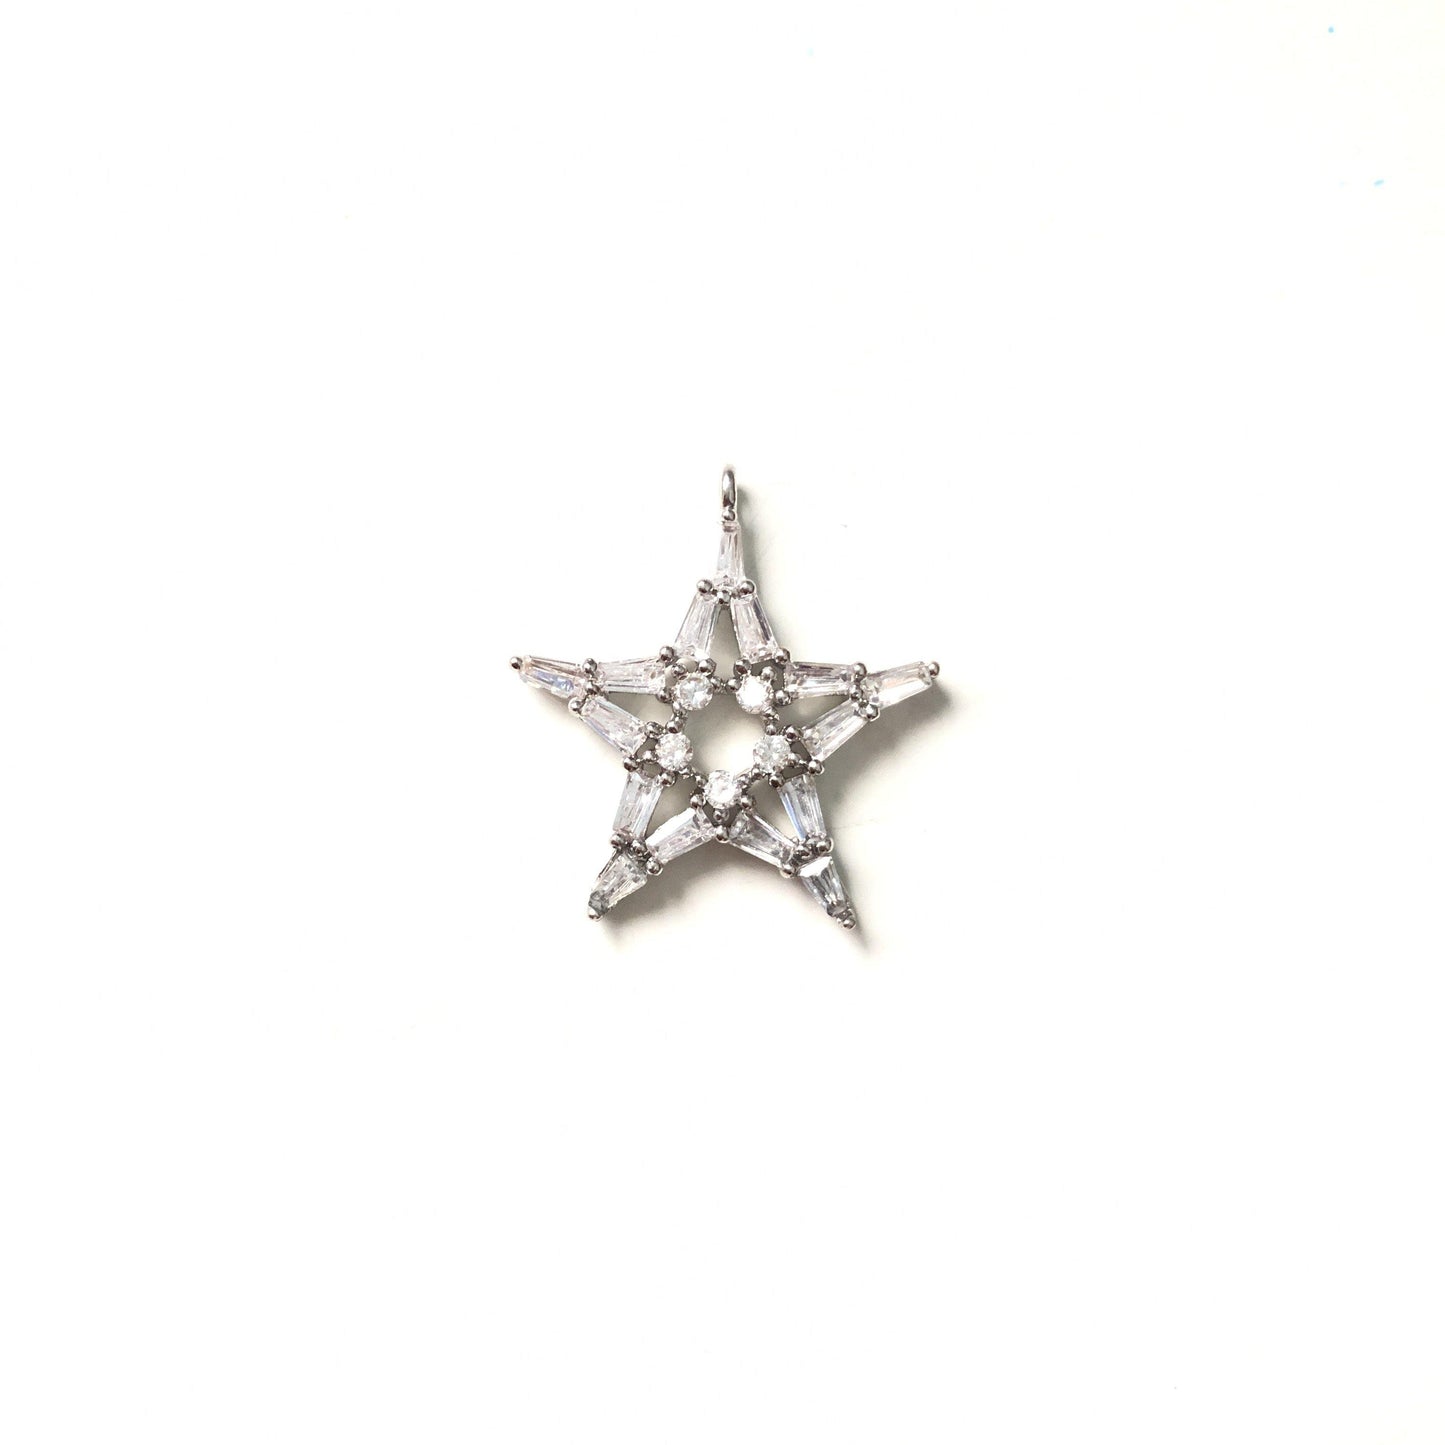 10pcs/lot 24.5*22mm Clear CZ Paved Star Charms Silver CZ Paved Charms Sun Moon Stars Charms Beads Beyond